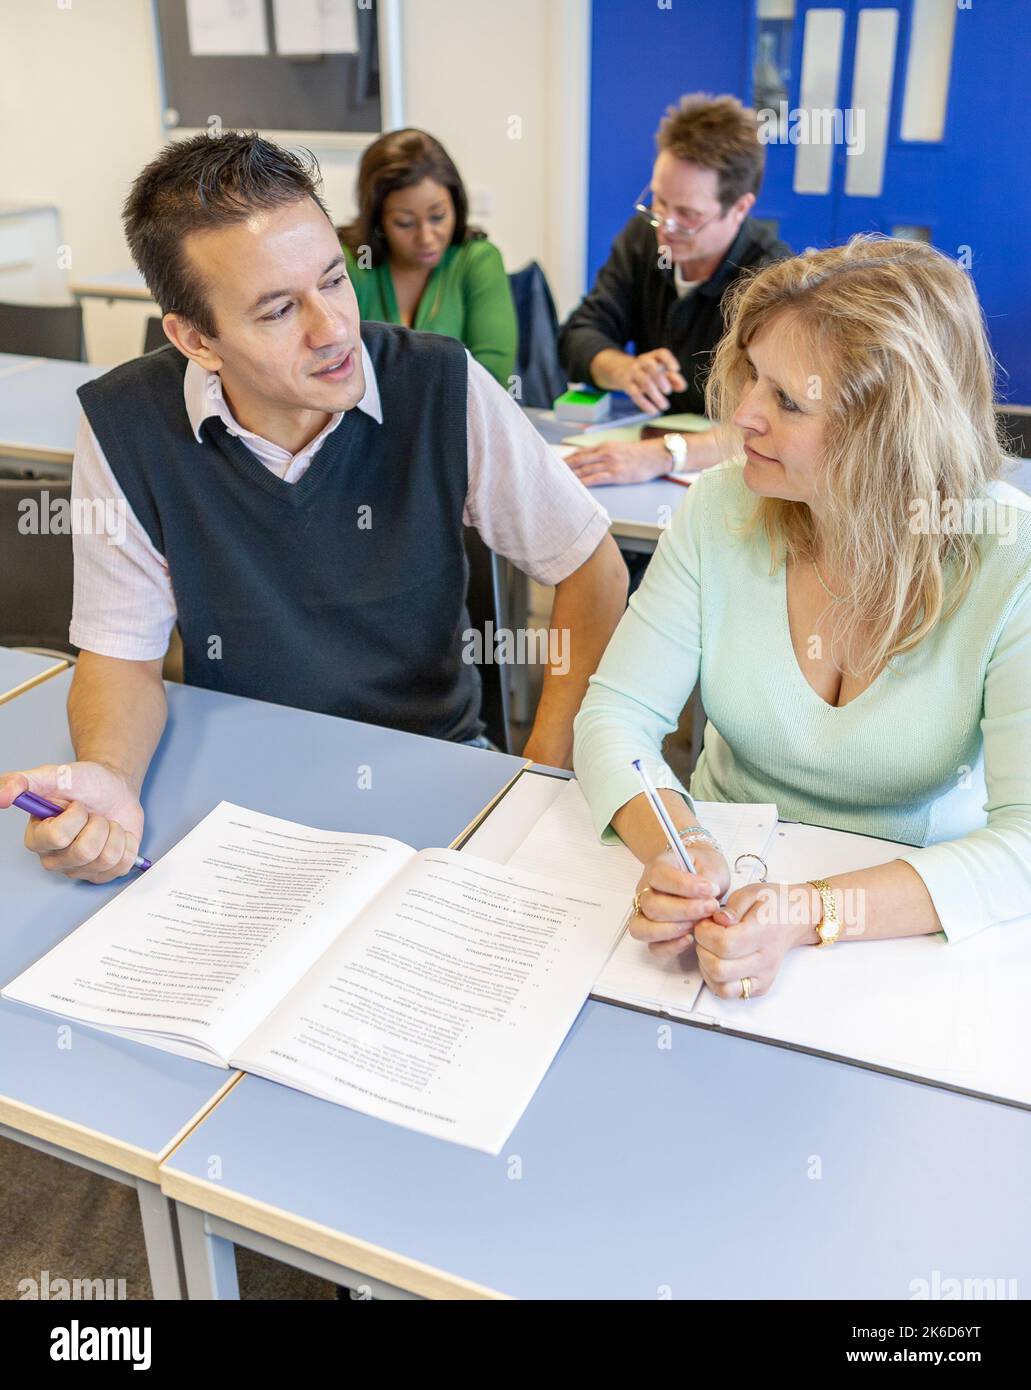 Adult Education: Teaching Advice. A teacher providing some individual tuition to a mature student. From a series of related images on the subject. Stock Photo